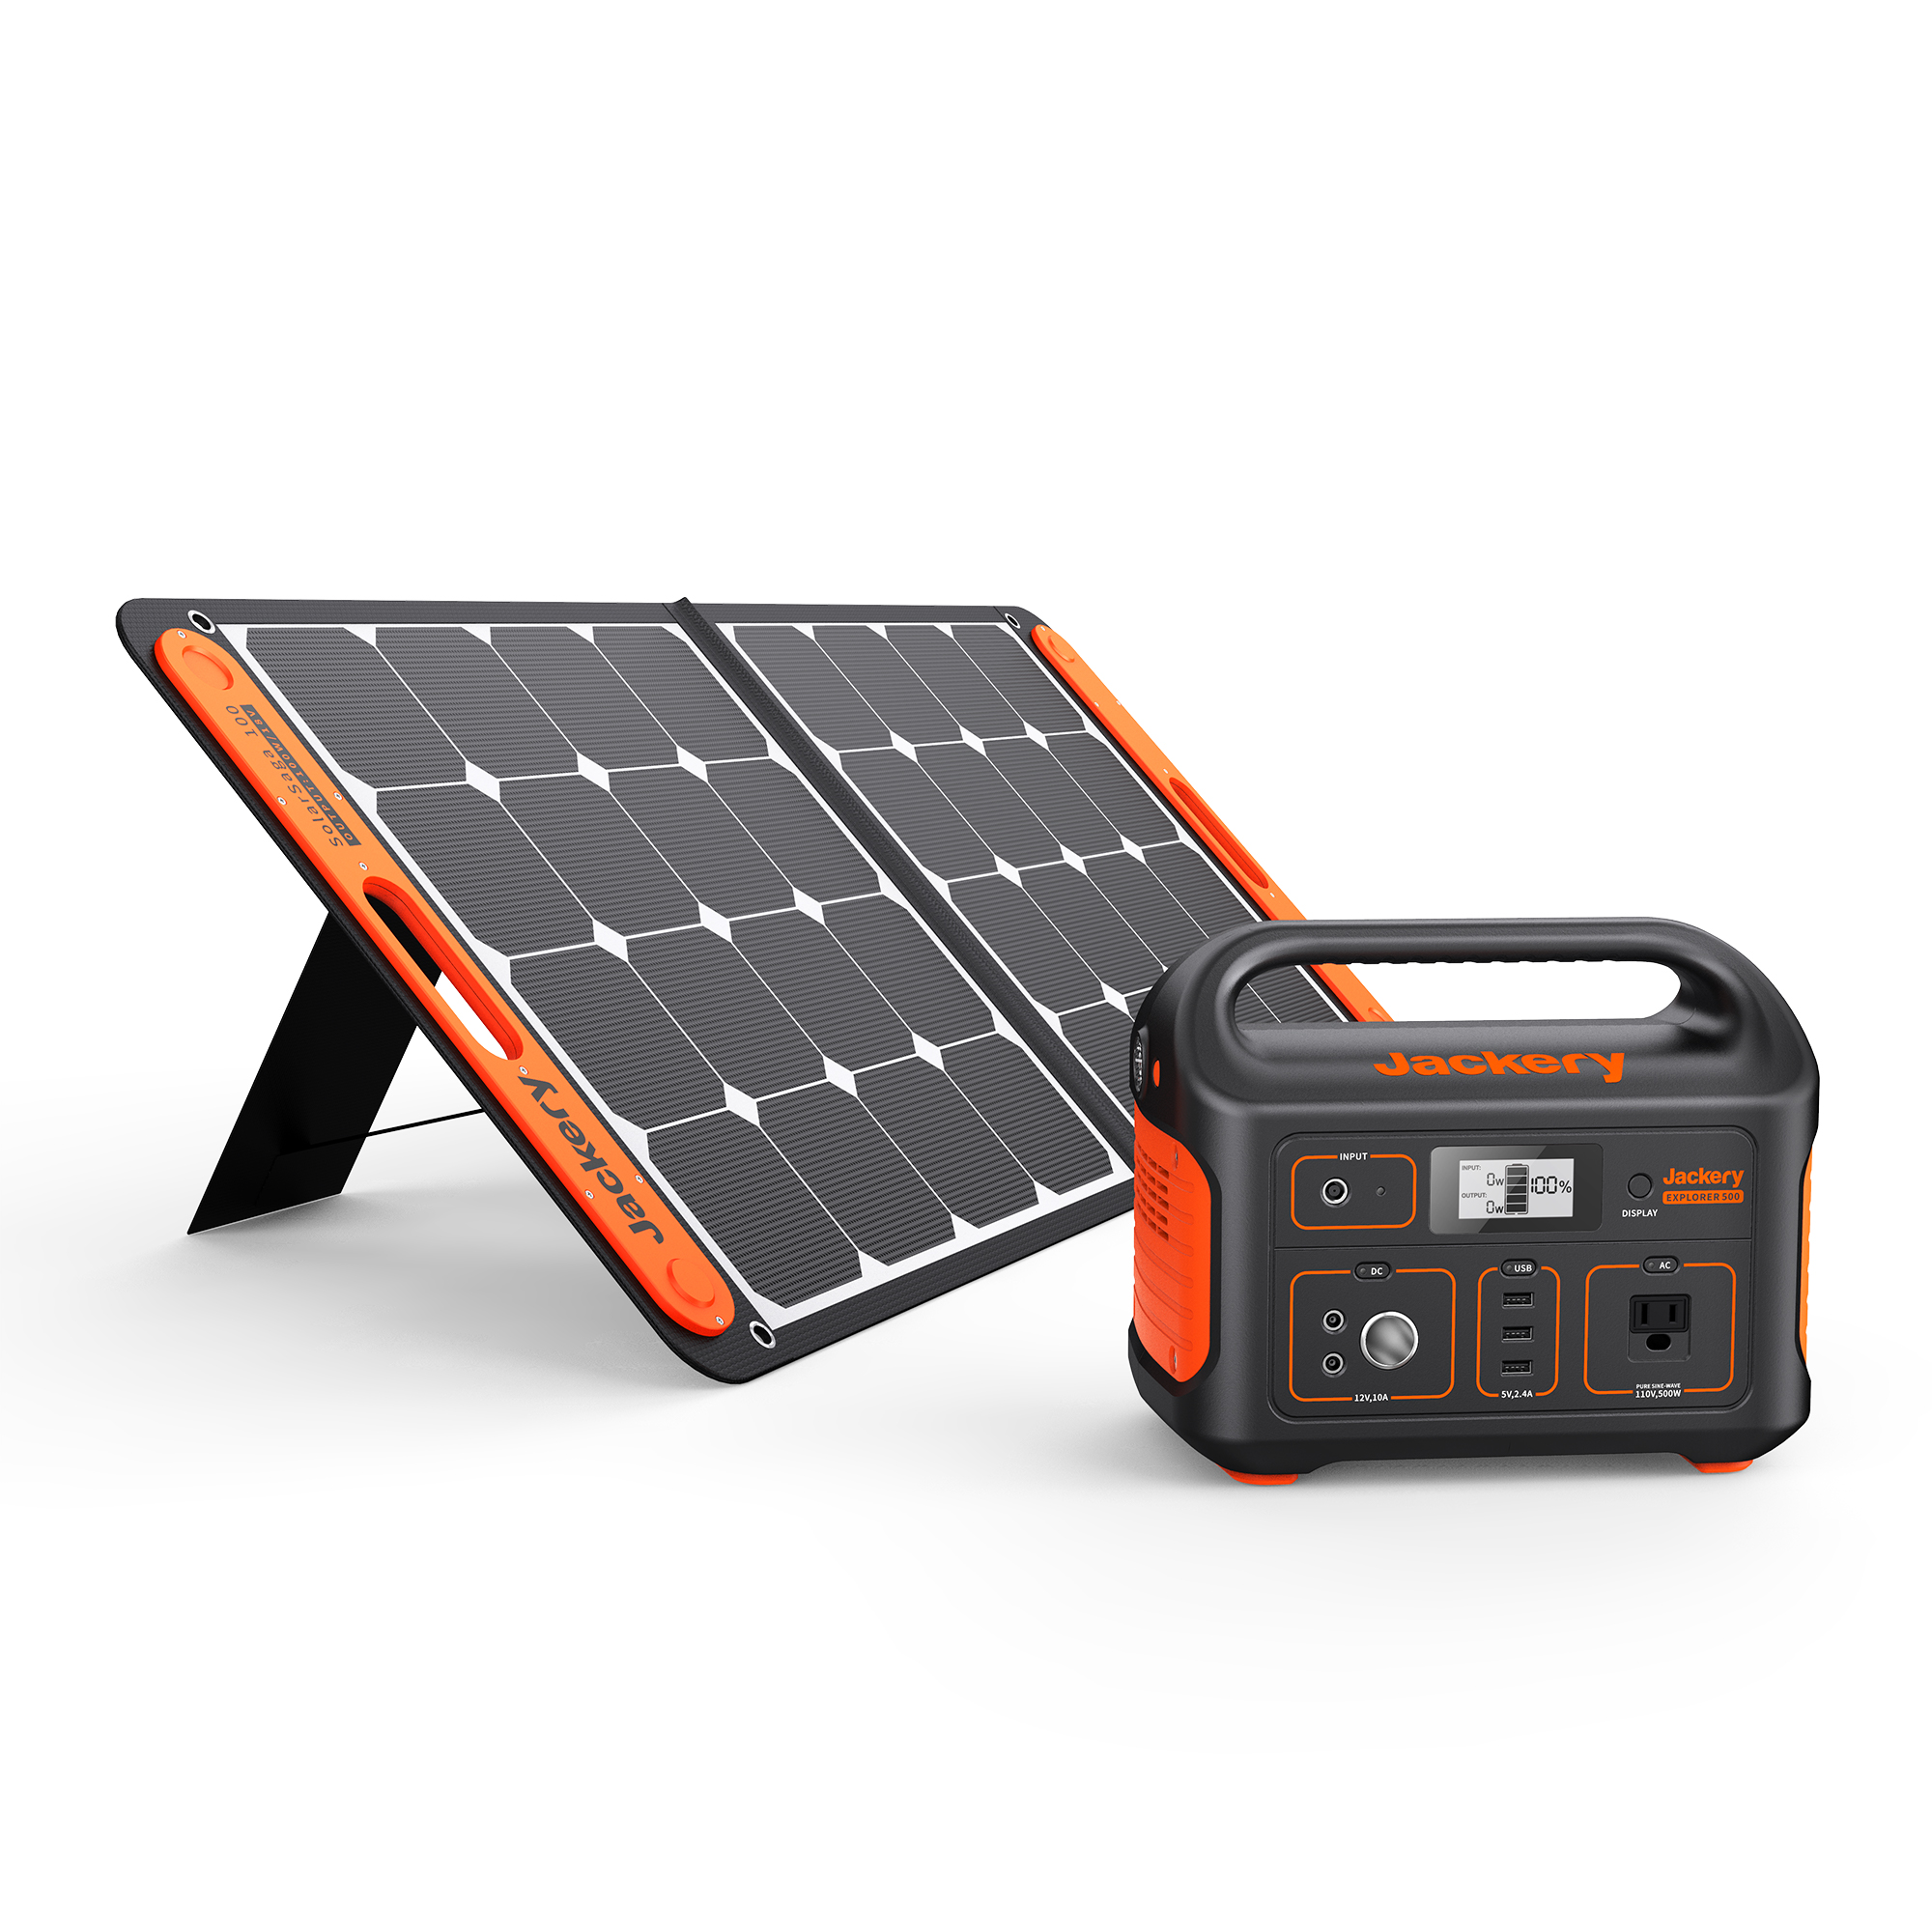 Jackery Solar Generator 500, 518Wh Outdoor Solar Generator Mobile Lithium Battery Pack with Solar Saga 100 for Road Trip Camping, Outdoor Adventure - image 1 of 6